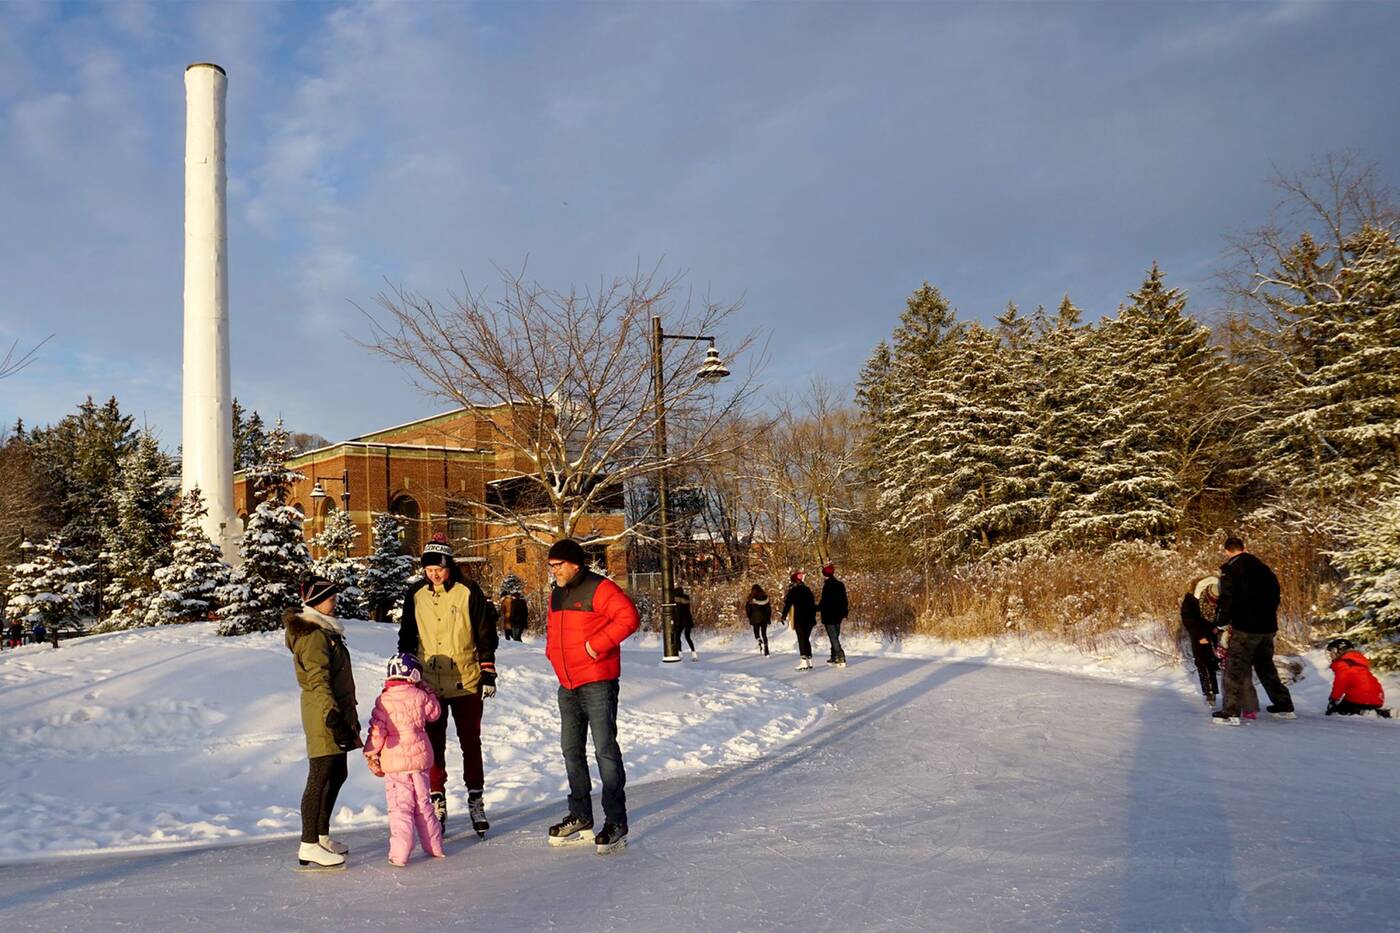 10 ways you can have fun for free outdoors in Toronto this winter